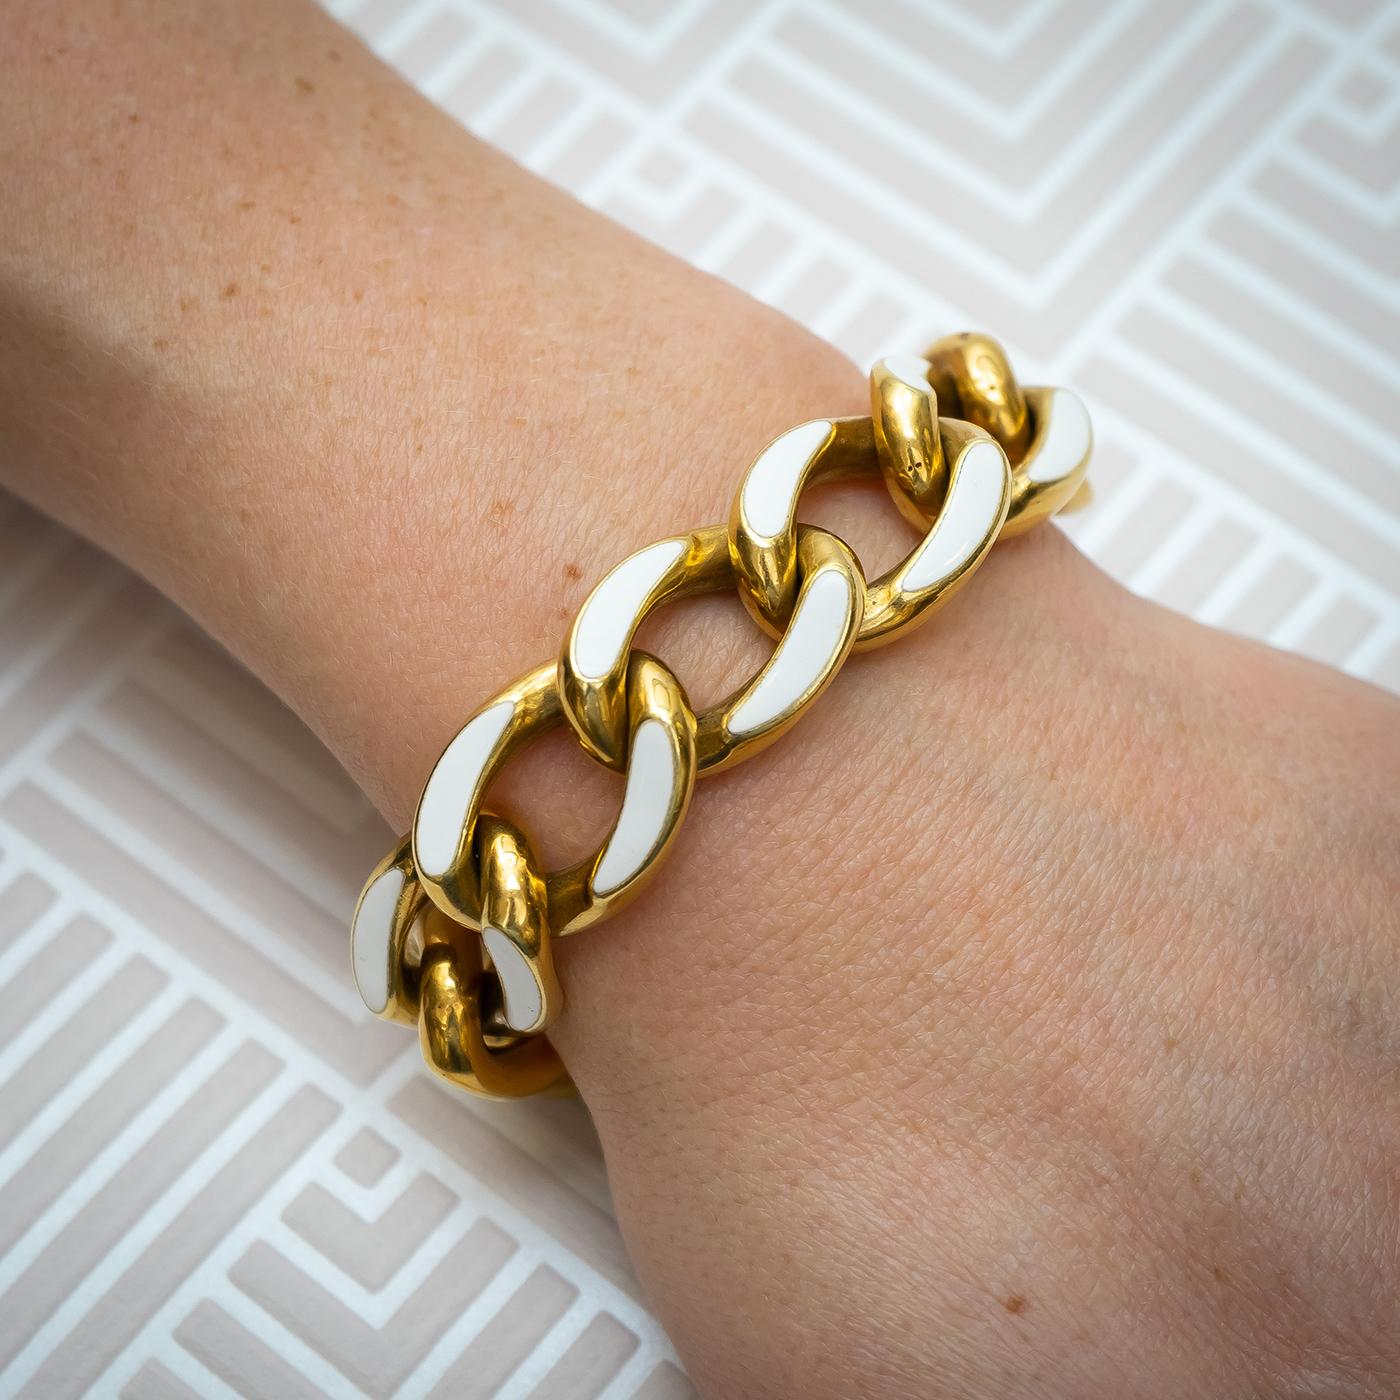 A vintage, enamel and gold, curb link bracelet, with a chunky, 18ct gold, hollow curb link chain, with white enamel on the flat top edges, with a concealed clasp, circa 1960.